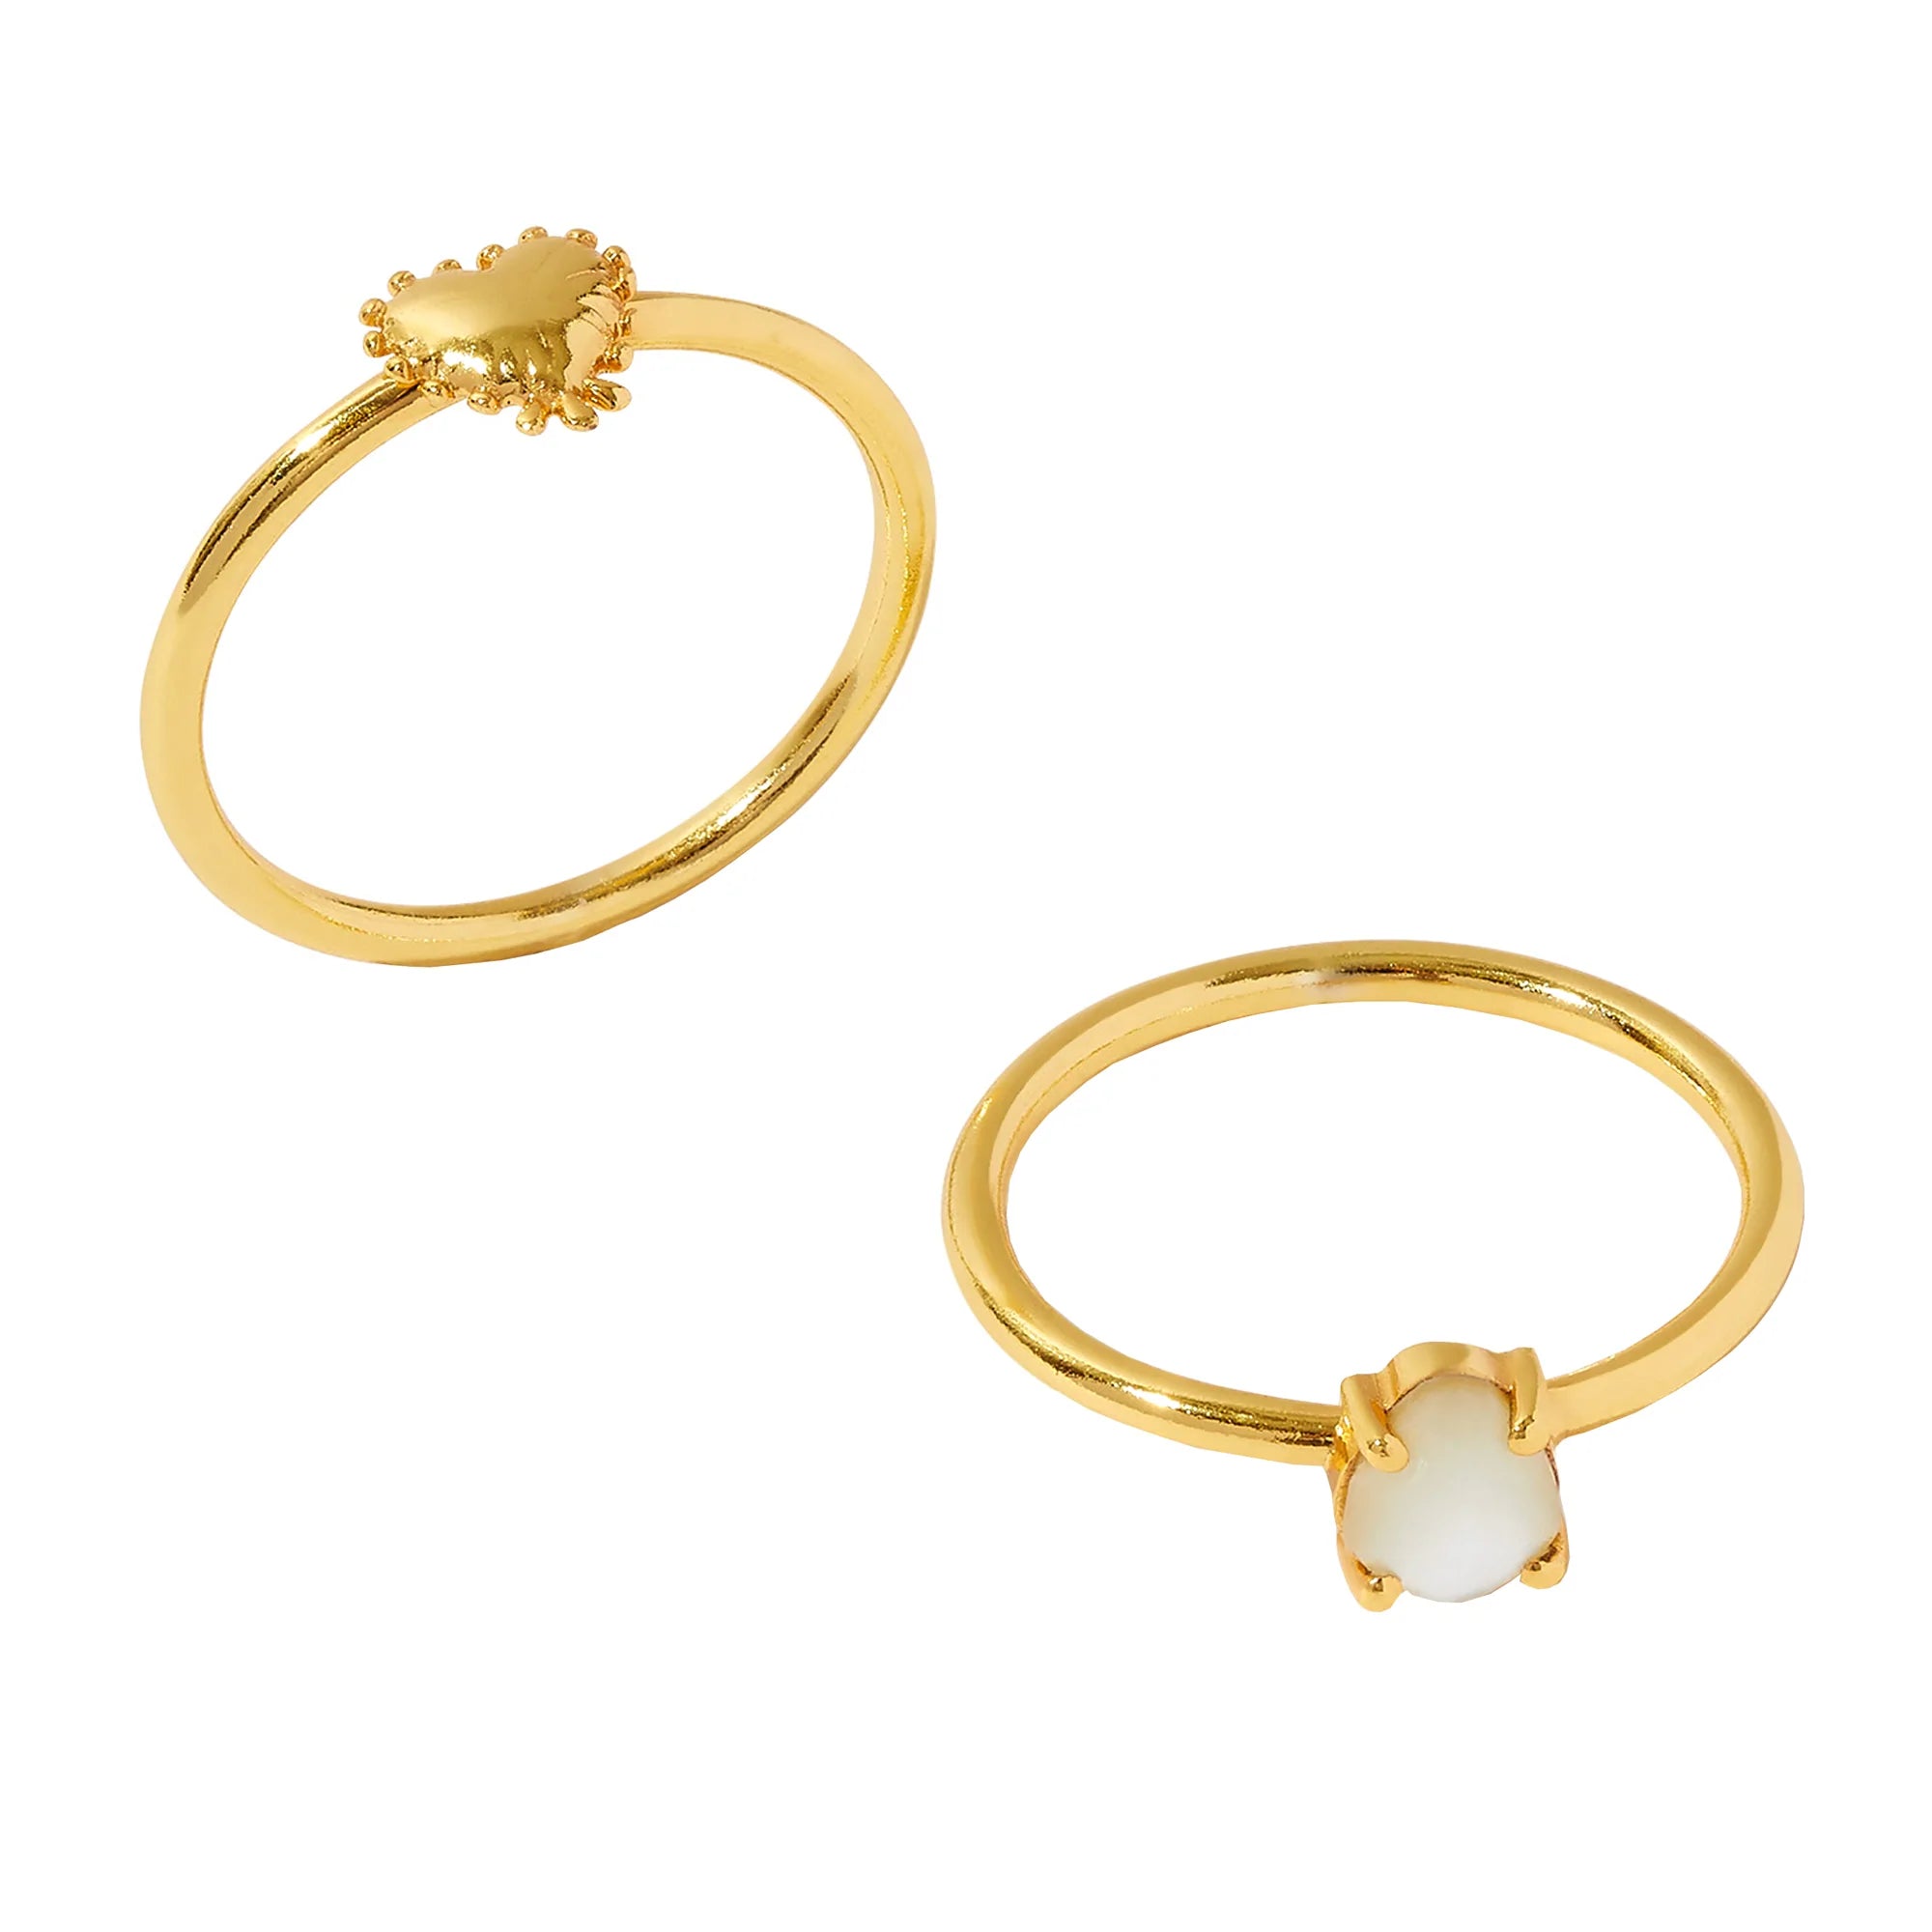 Real Gold Plated Z Set of Two Grecian Heart Rings For Women By Accessorize London-Medium